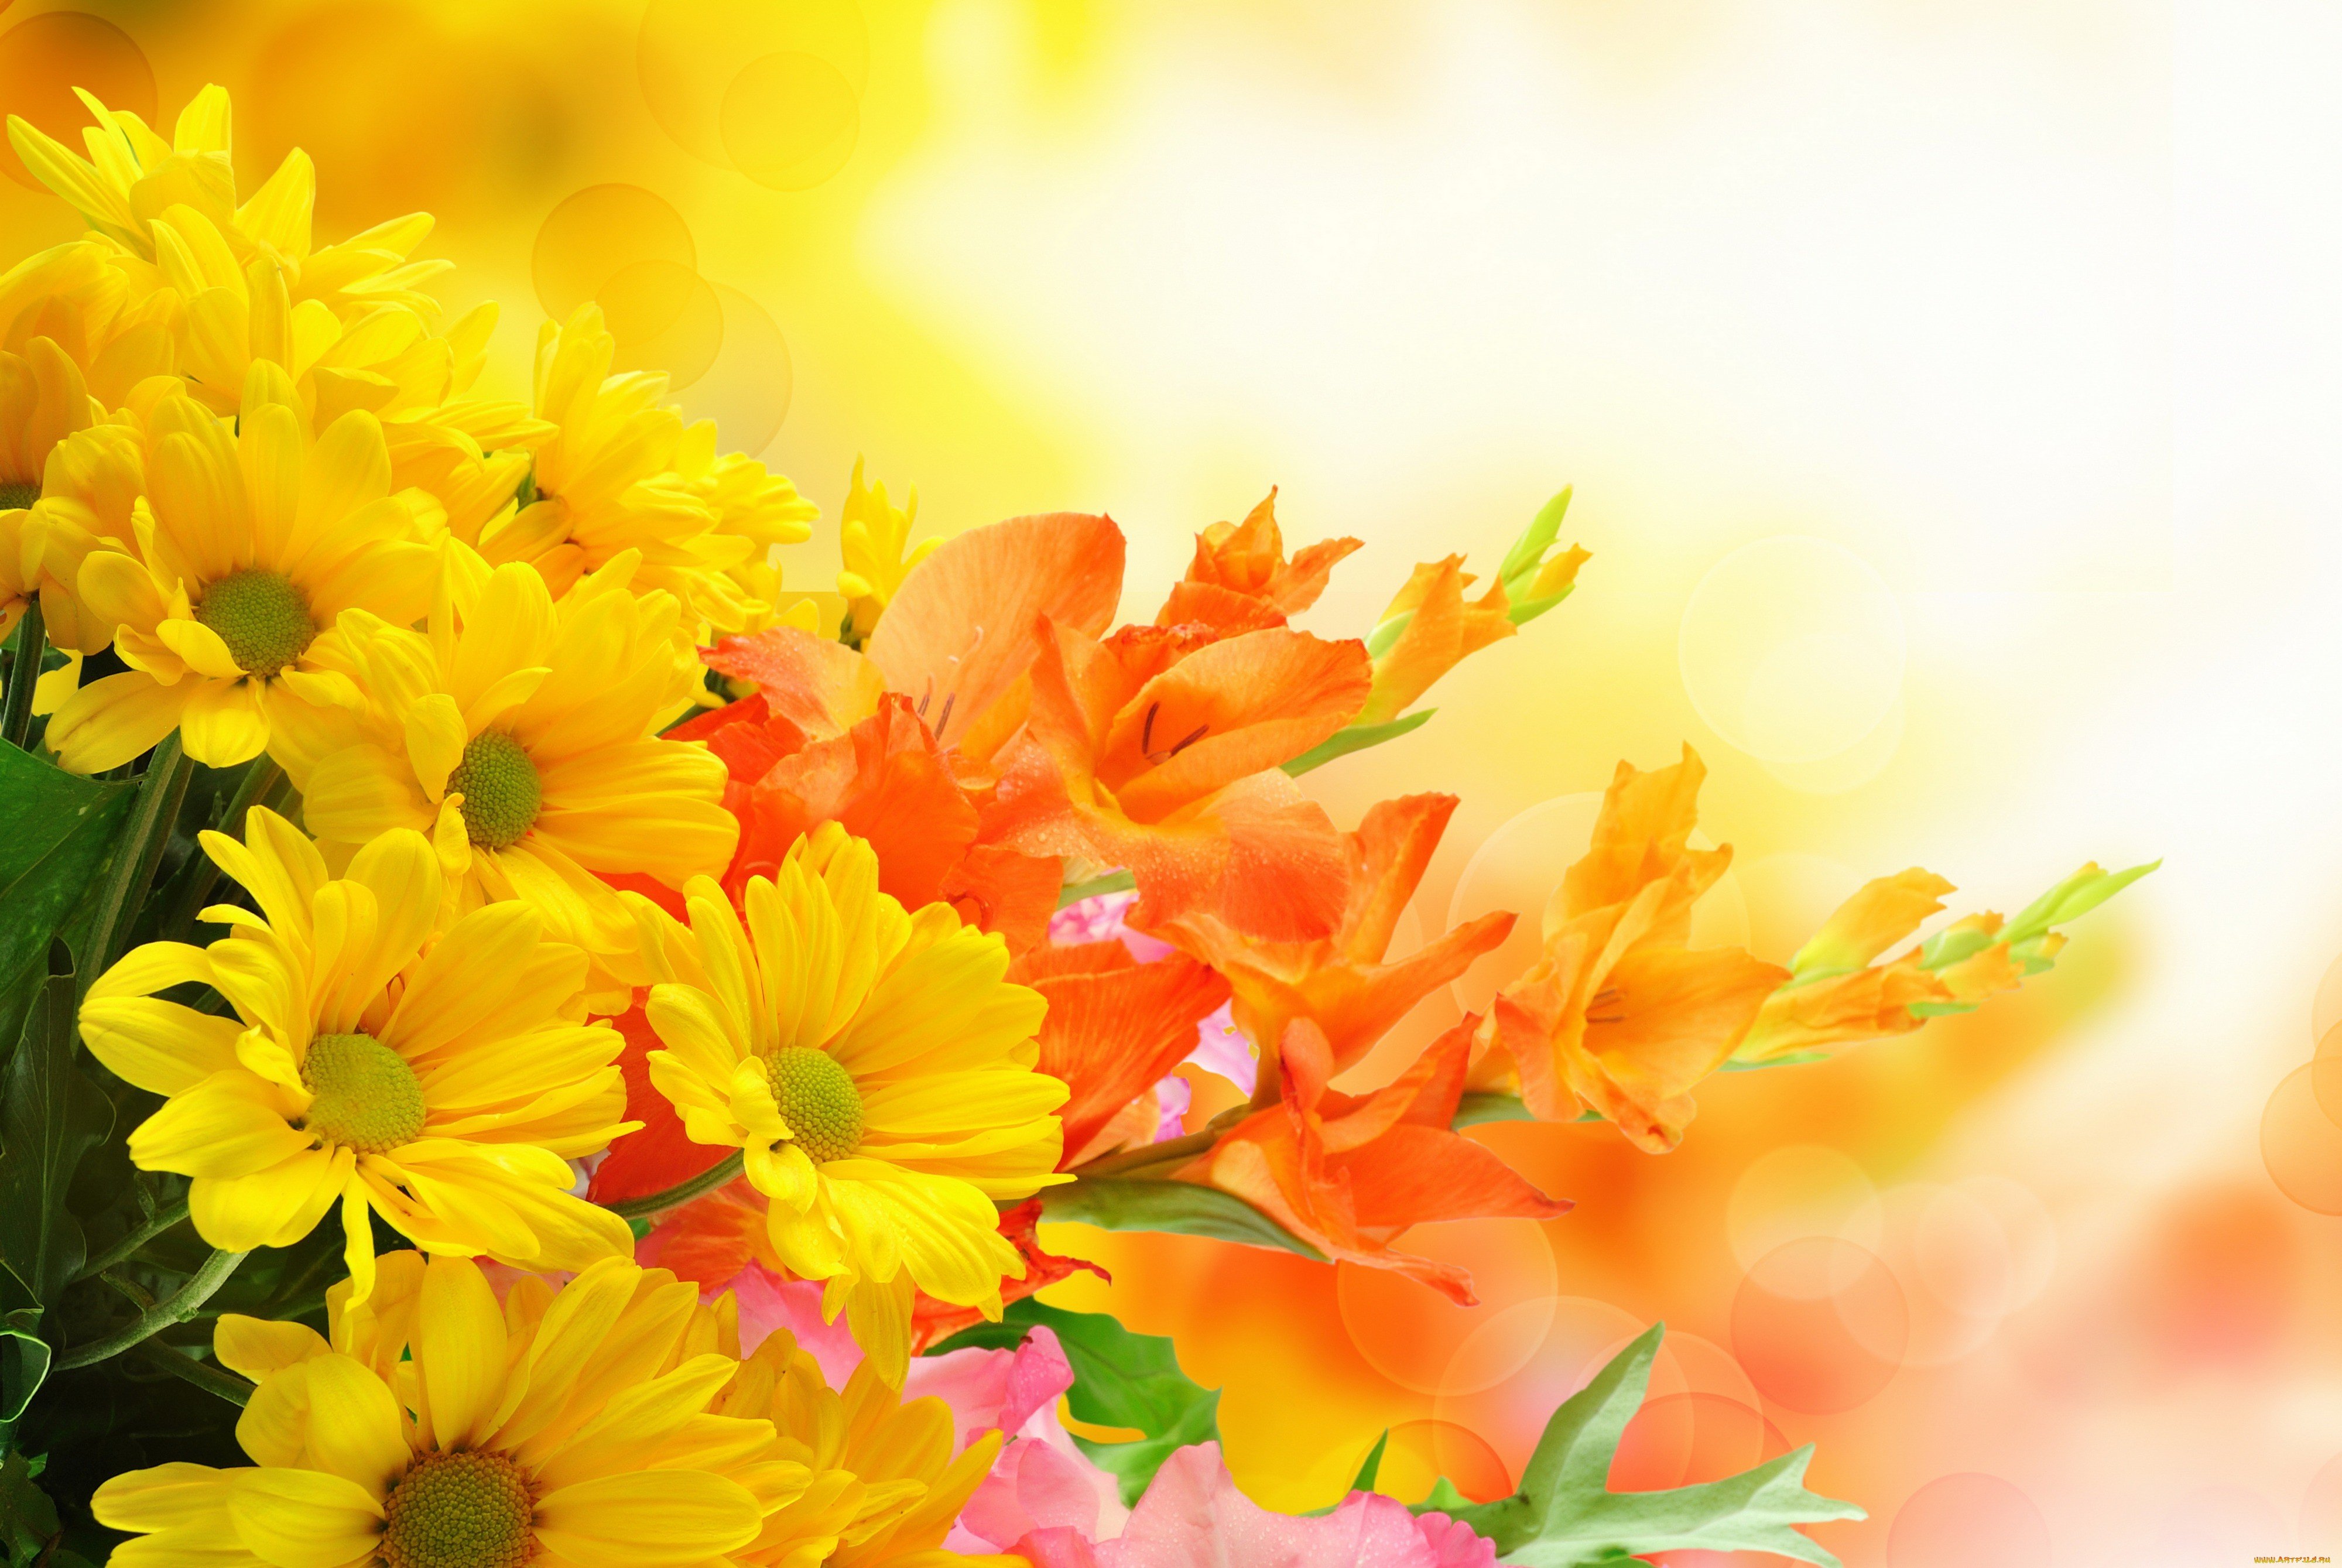 Yellow and Orange Flowers 4k Ultra HD Wallpaper Background Image